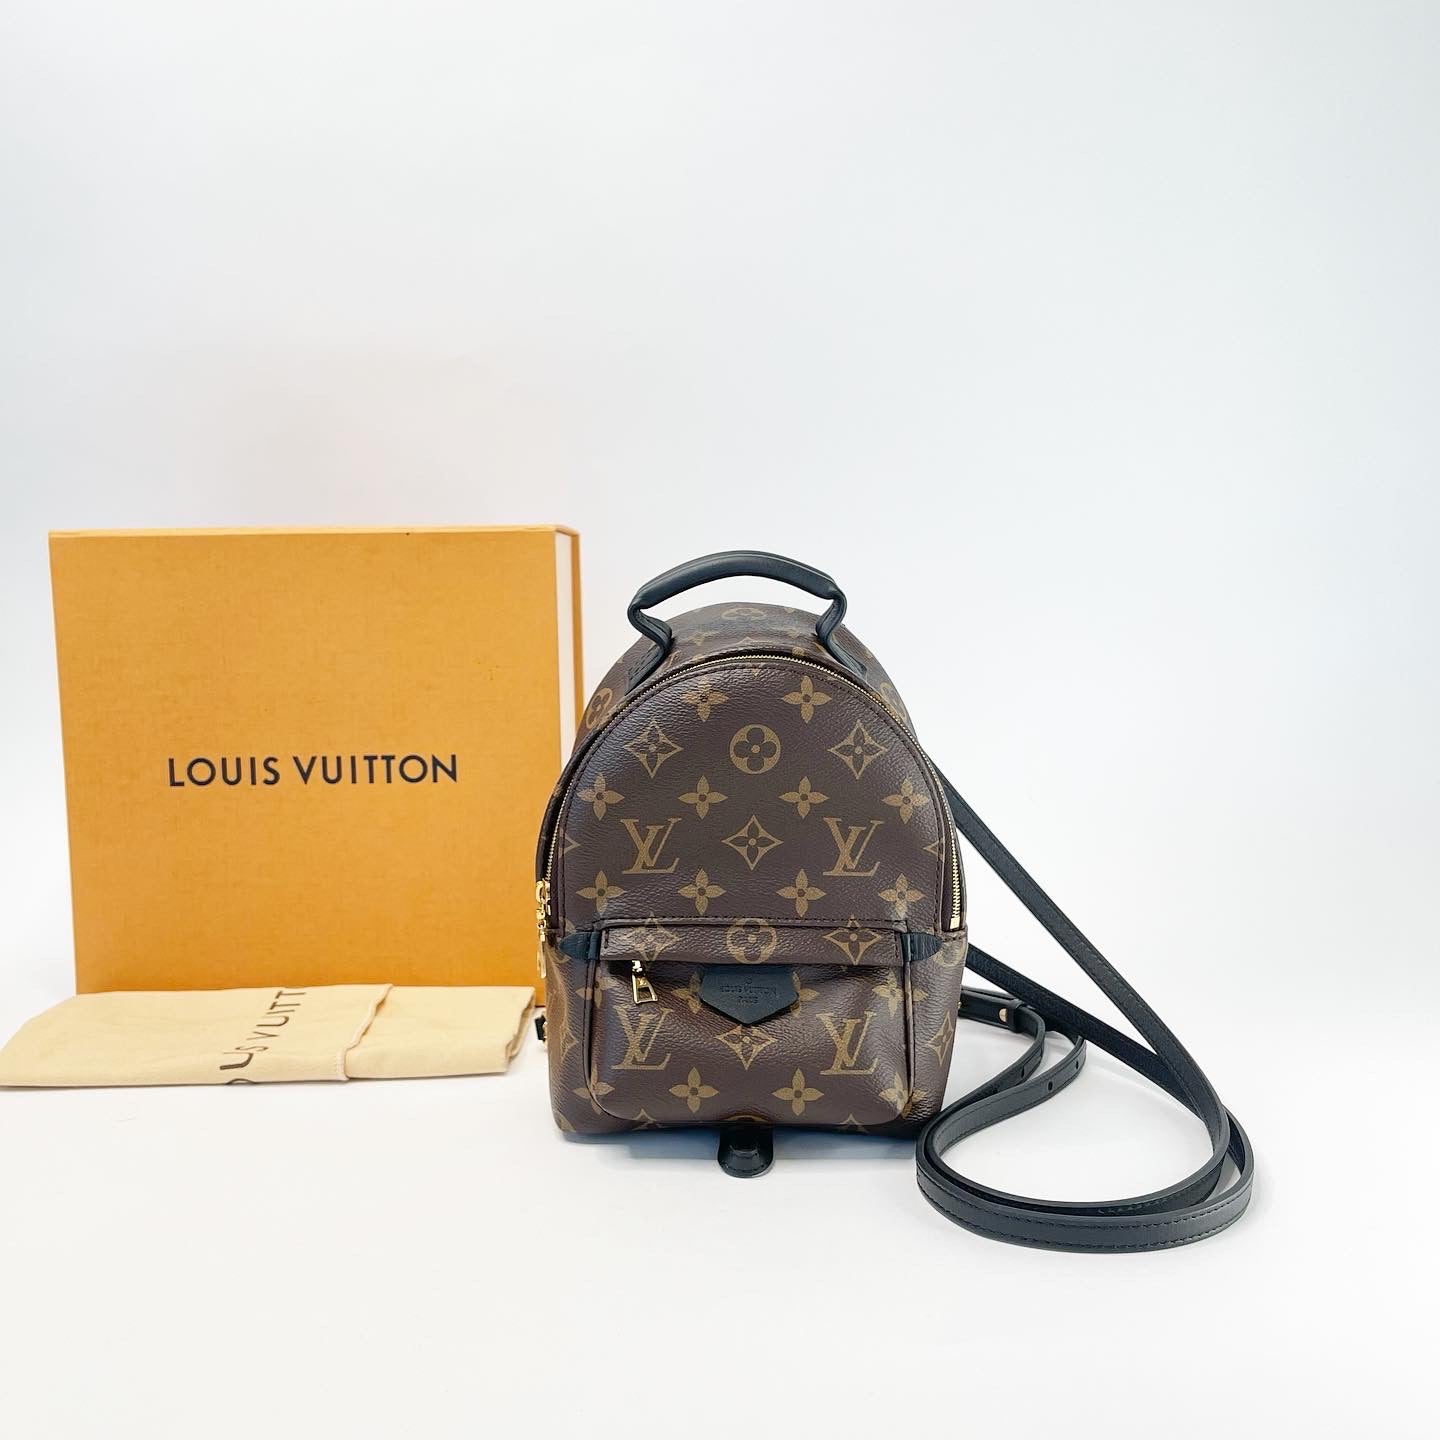 LOUIS VUITTON Palm spring MINI rucksack backpack M44873Product  Code2104101885097BRAND OFF Online Store